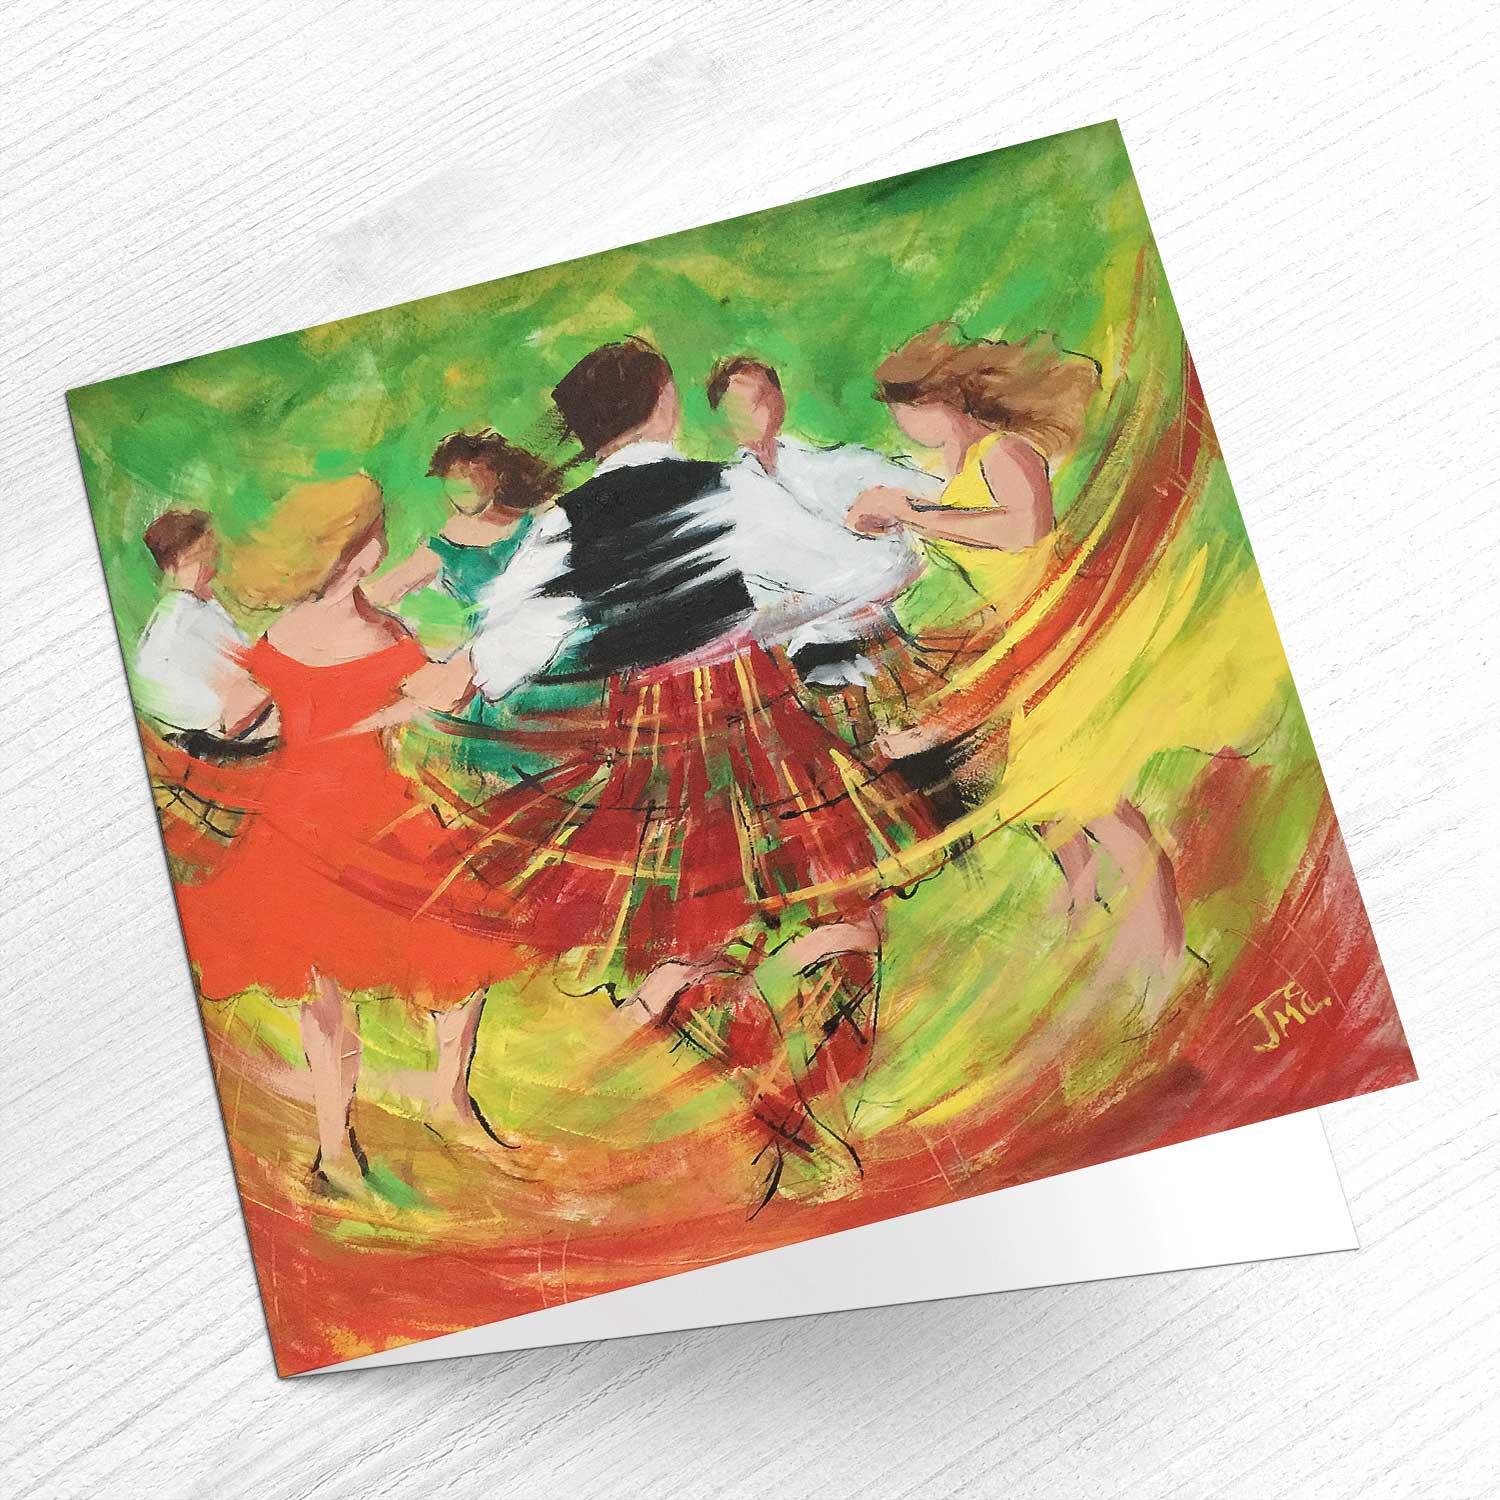 Jig St. Clements Greeting Card from an original painting by artist Janet McCrorie